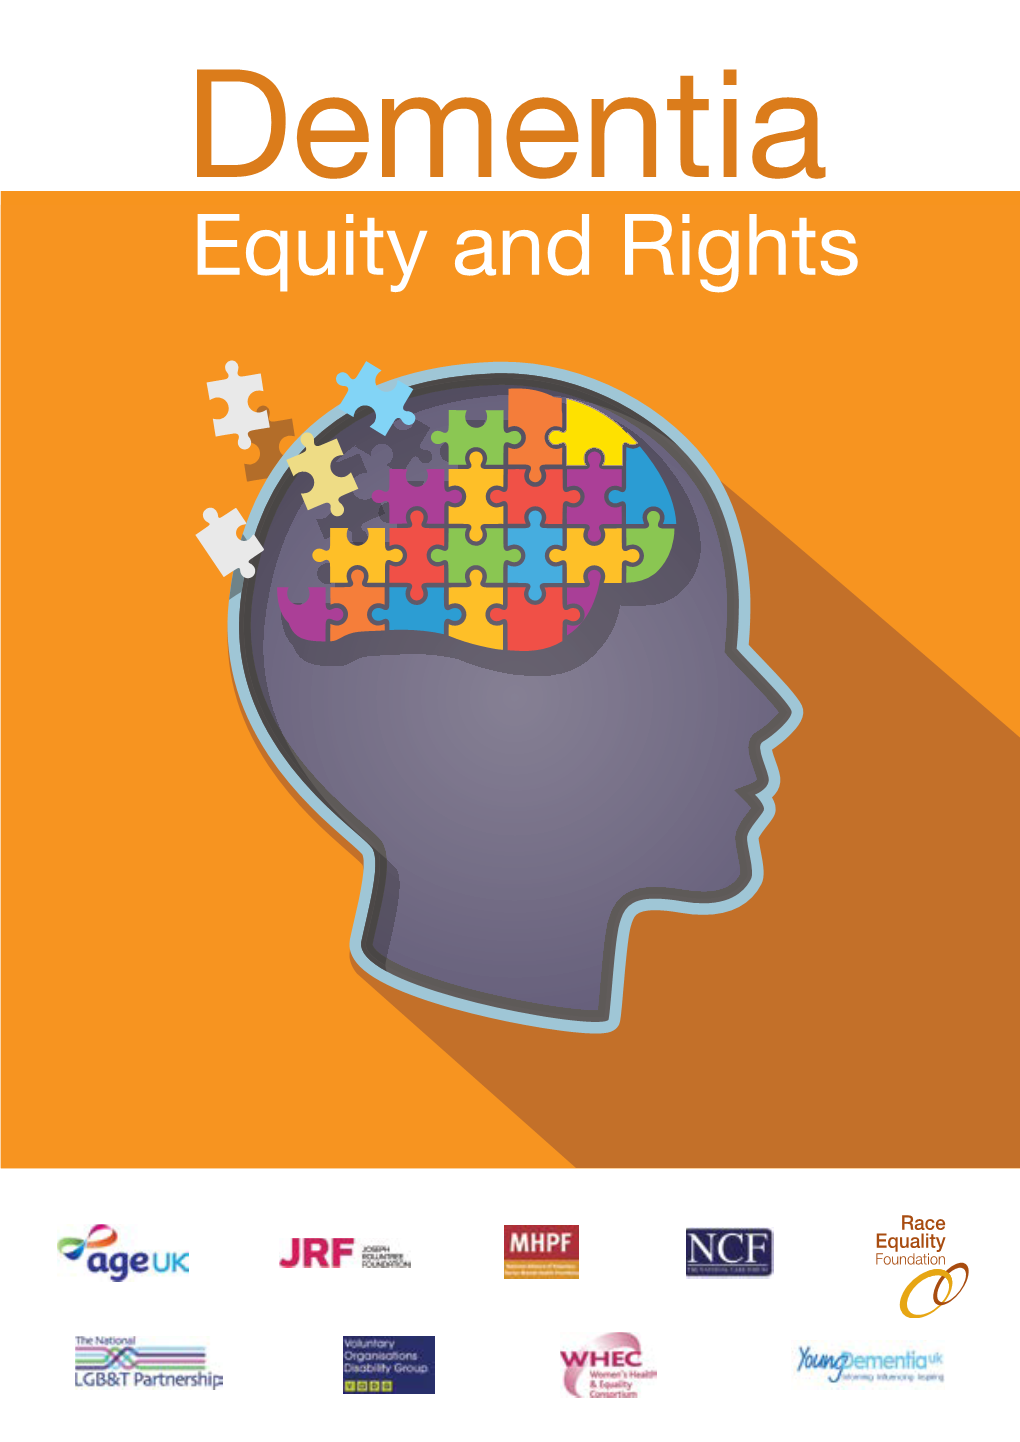 Dementia, Equity and Rights